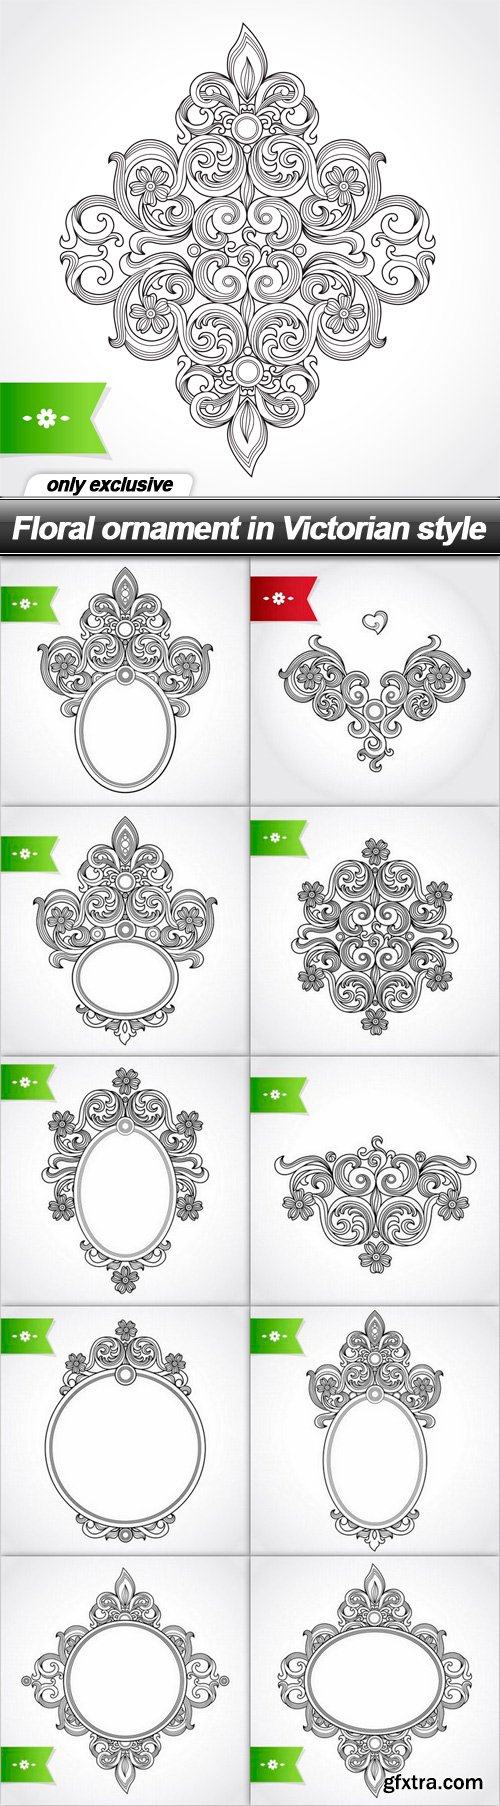 Floral ornament in Victorian style - 11 EPS